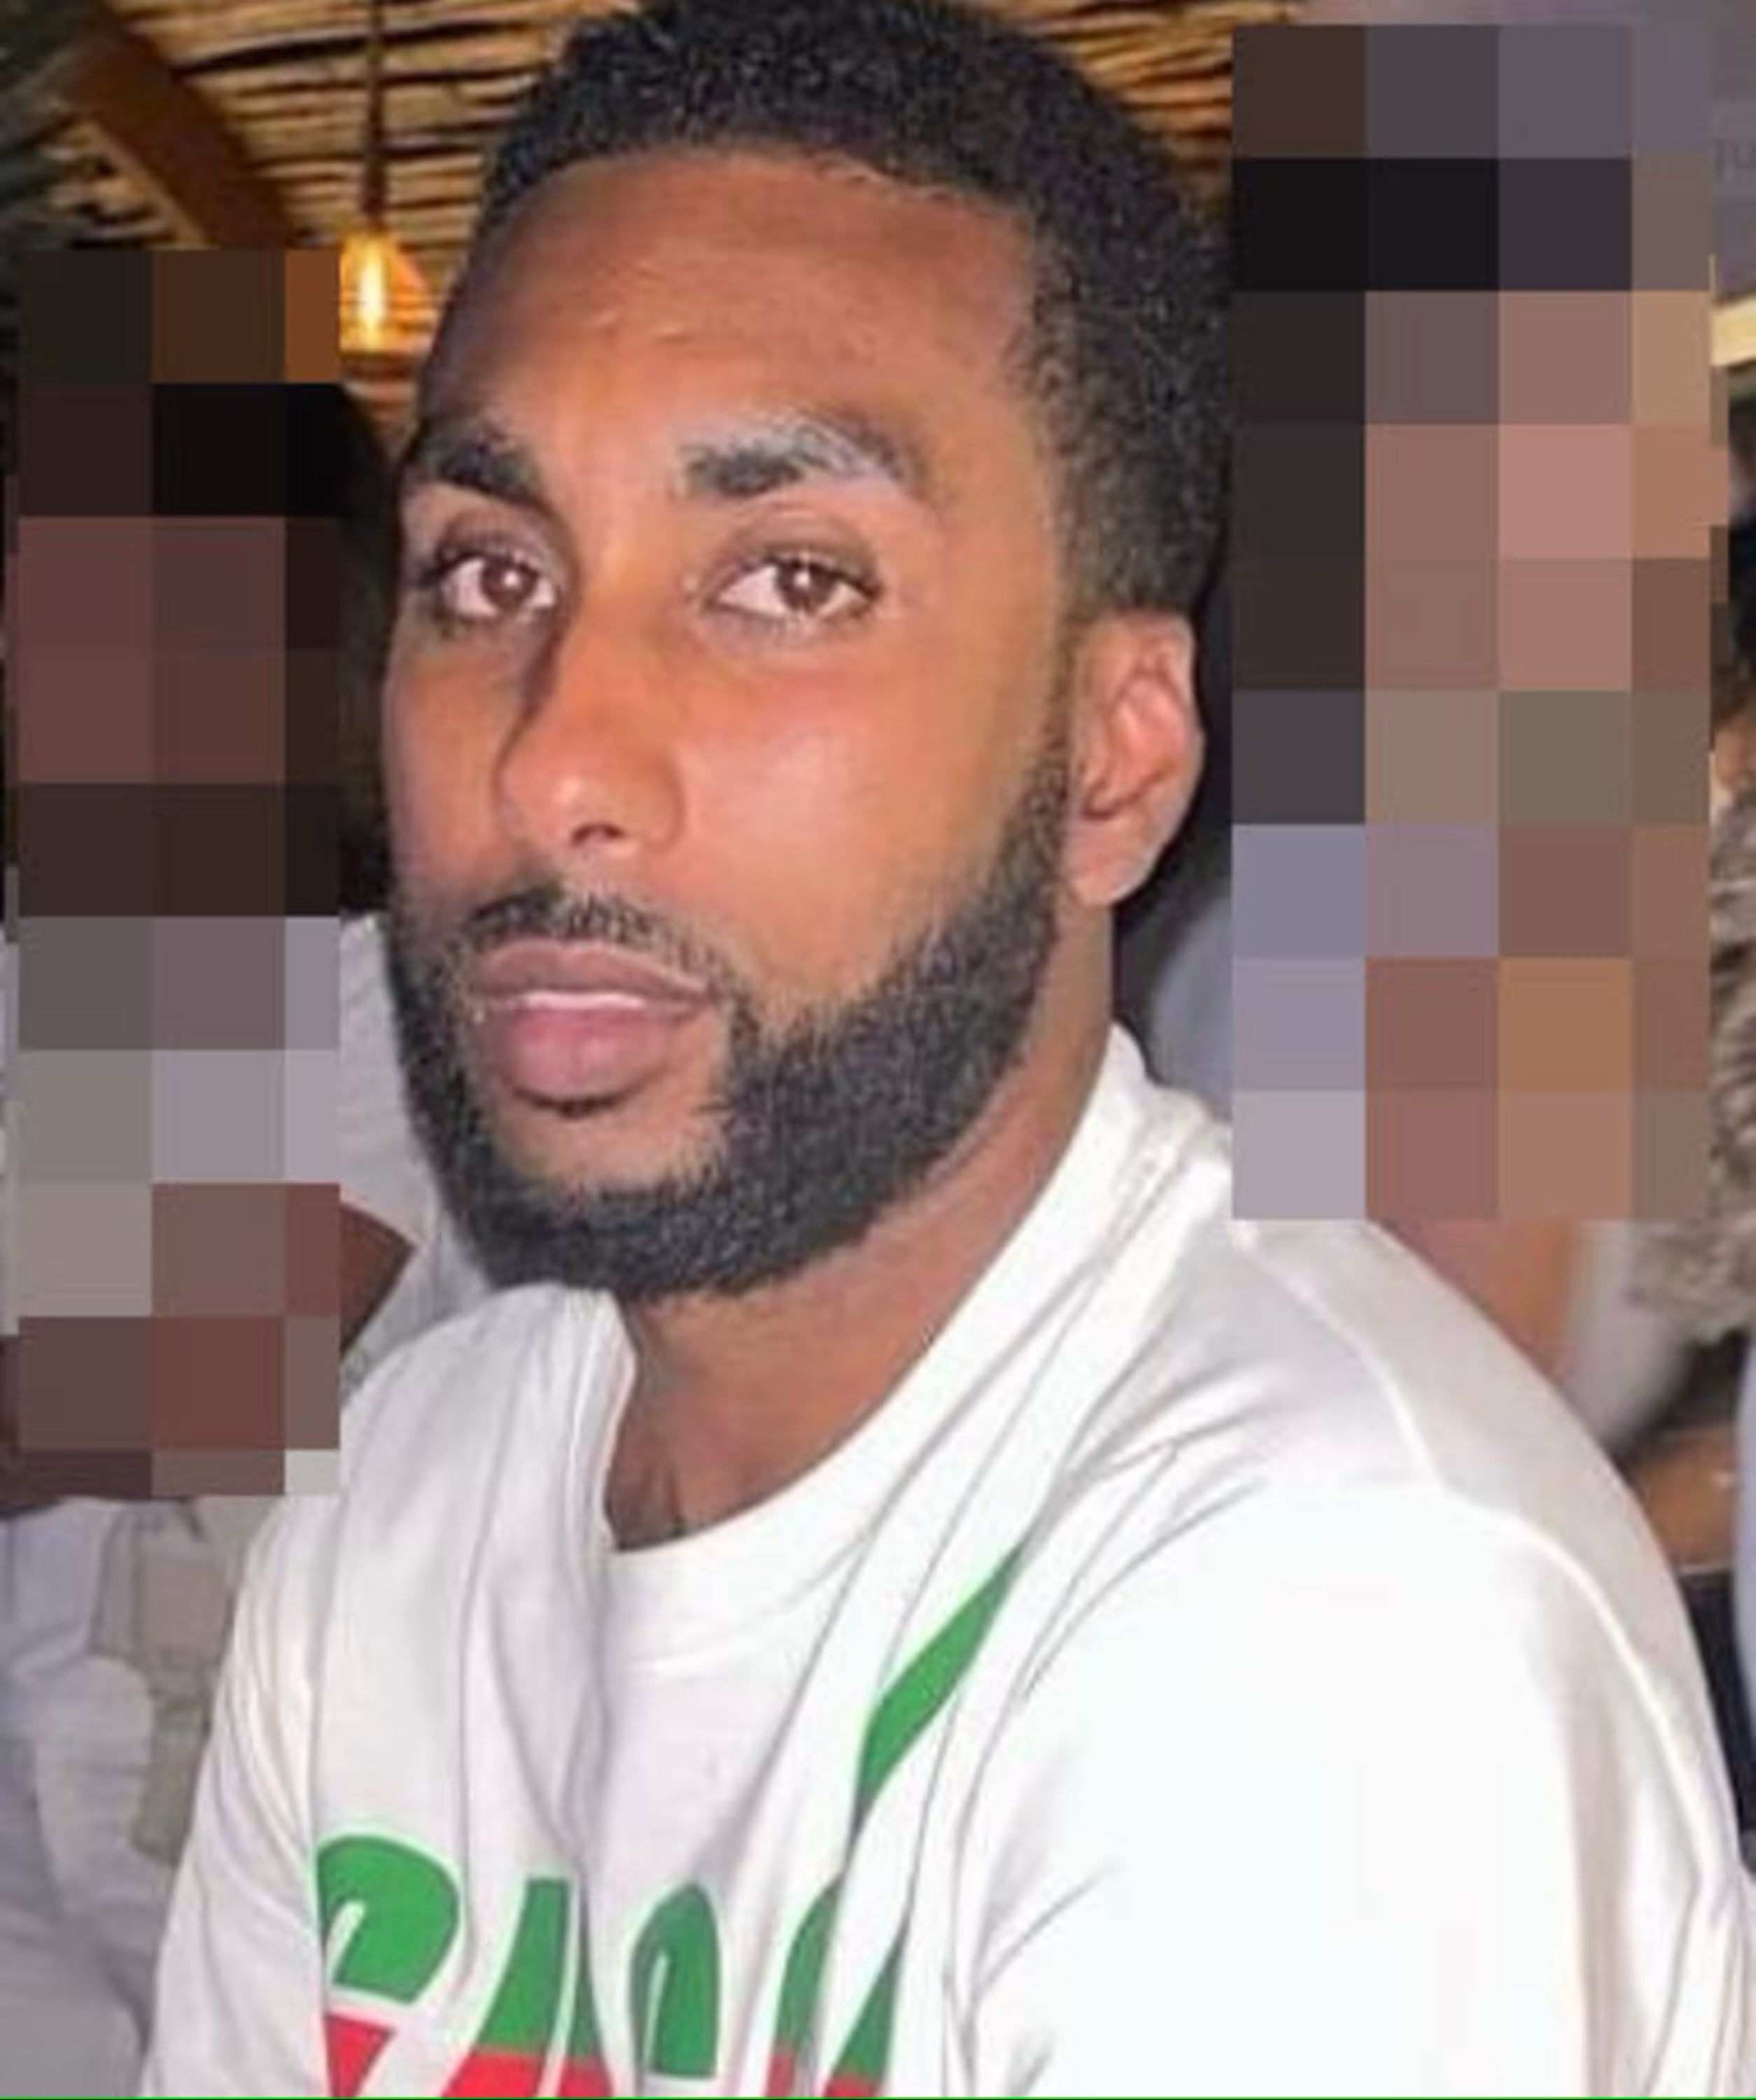 Justin Henry, 34, was last seen in person at his partner’s address in Brixton on 15 October